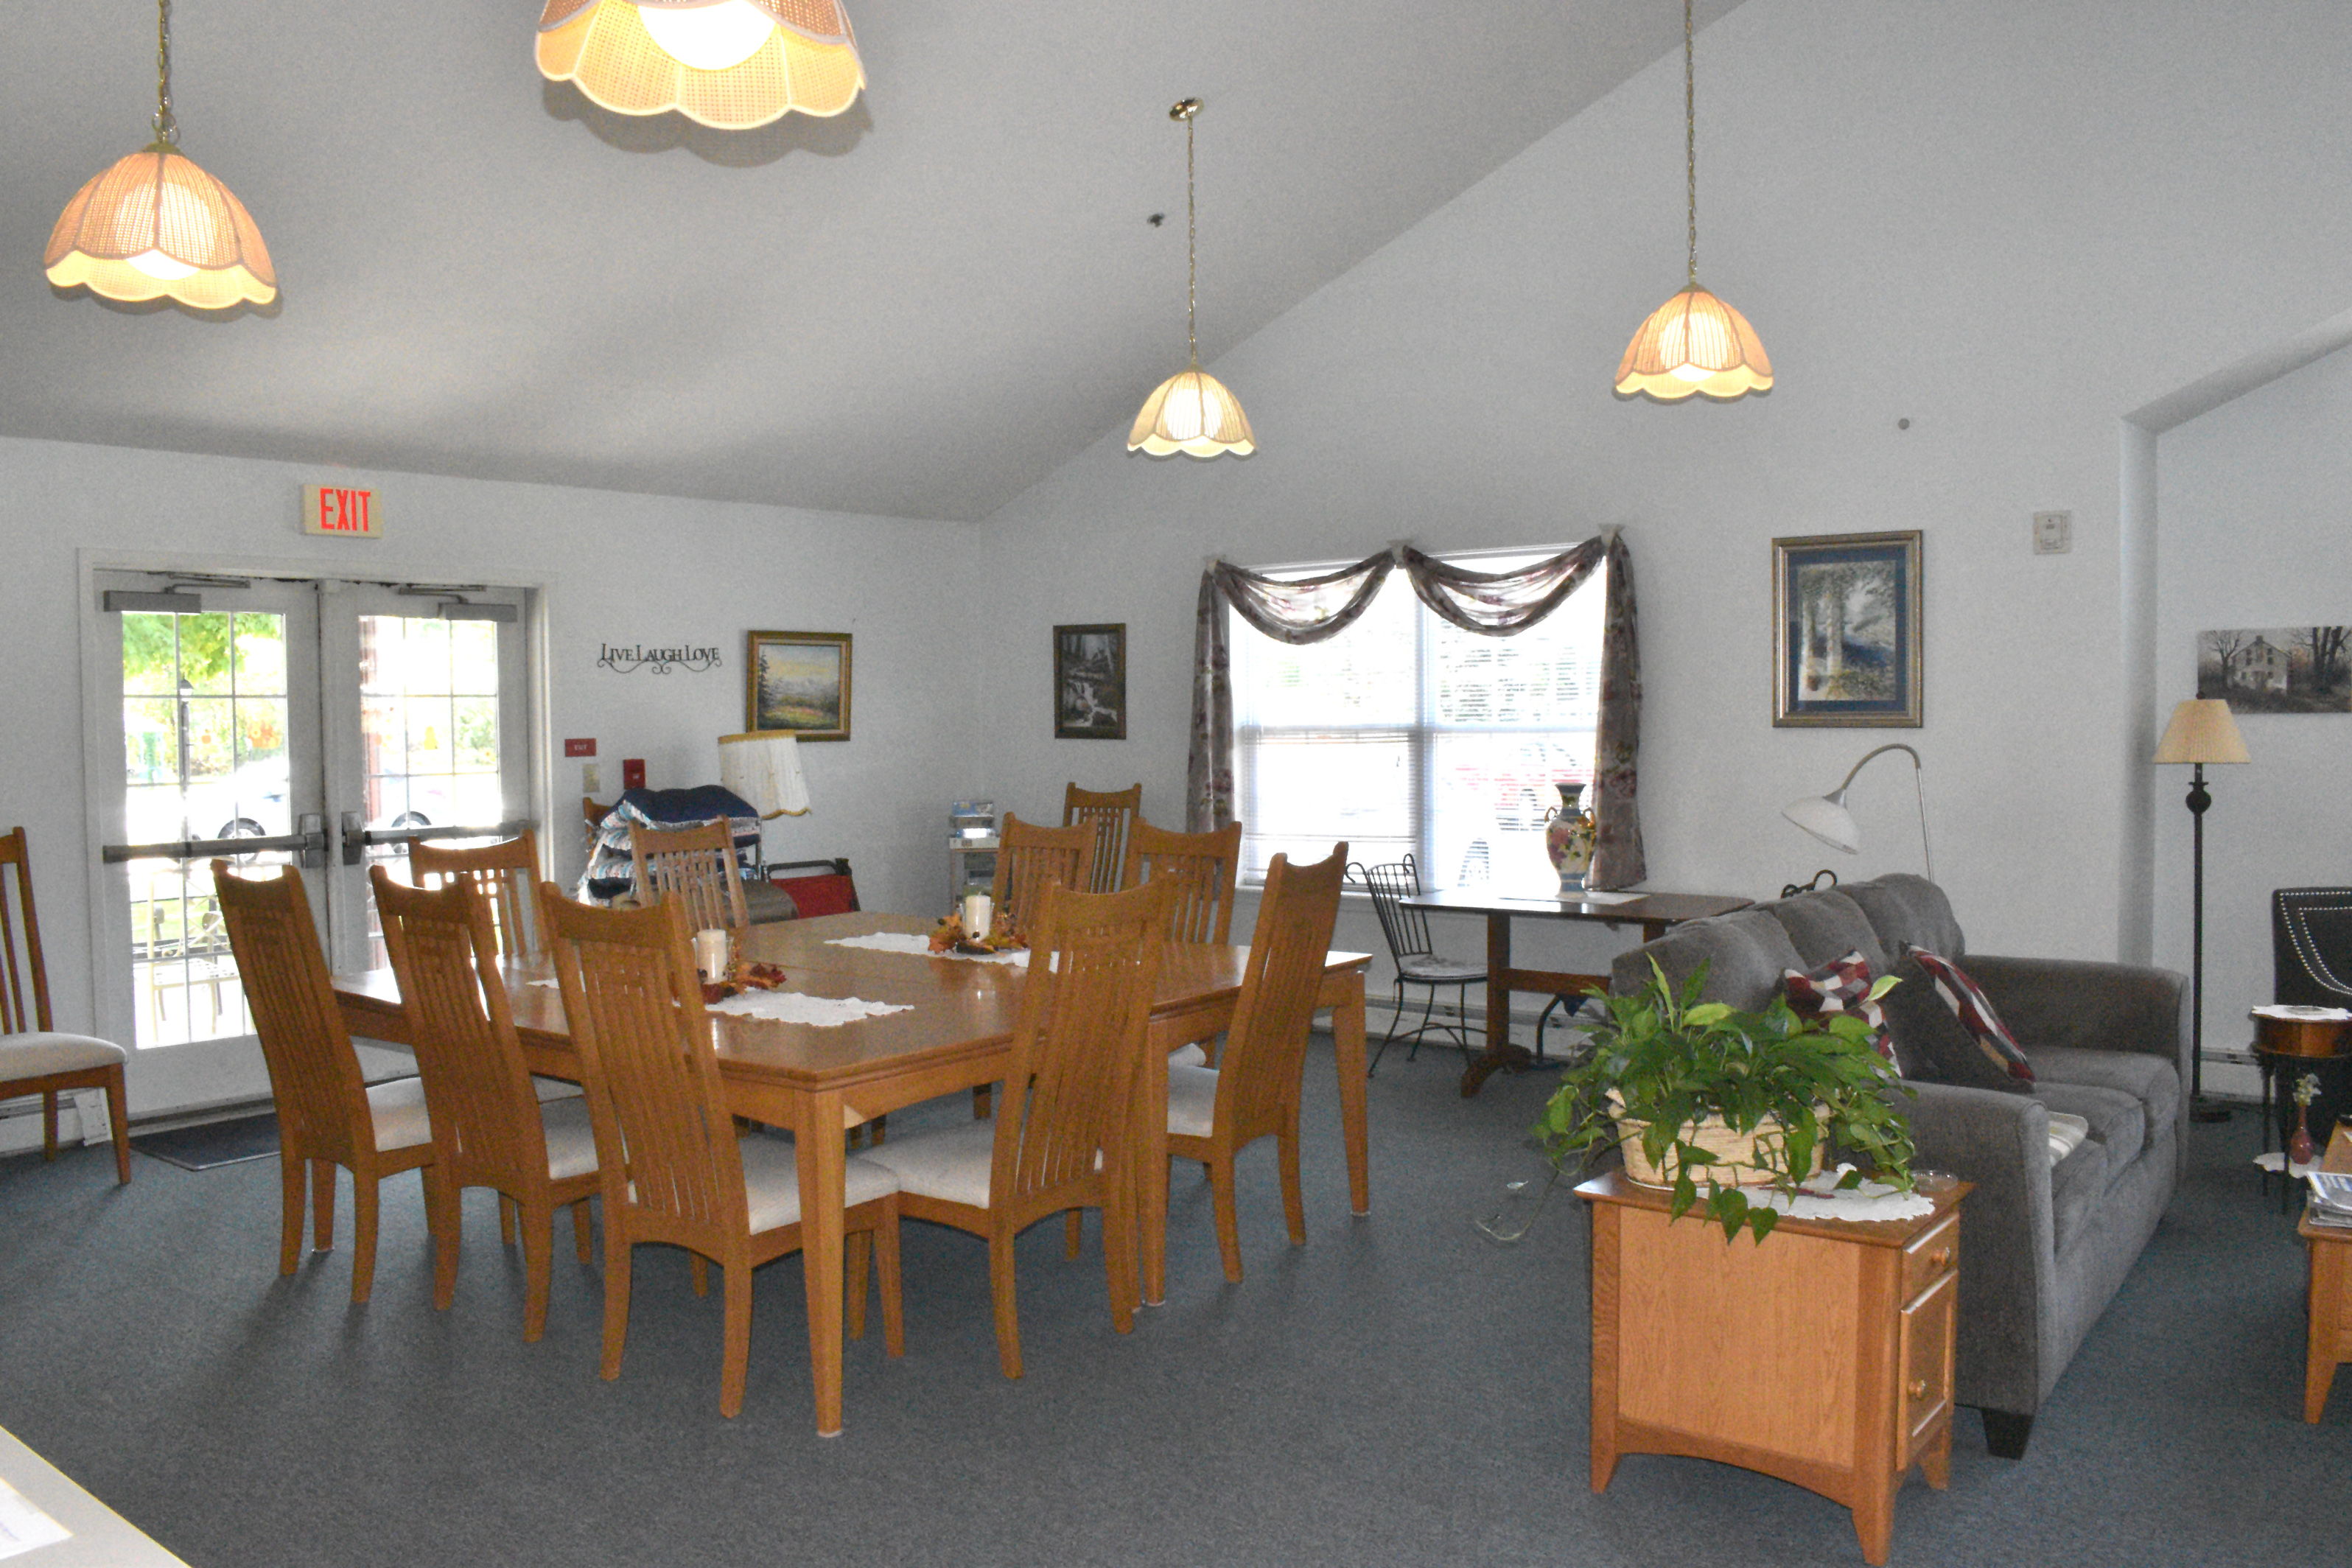 property management company syracuse ny image of community room at eastview gardens